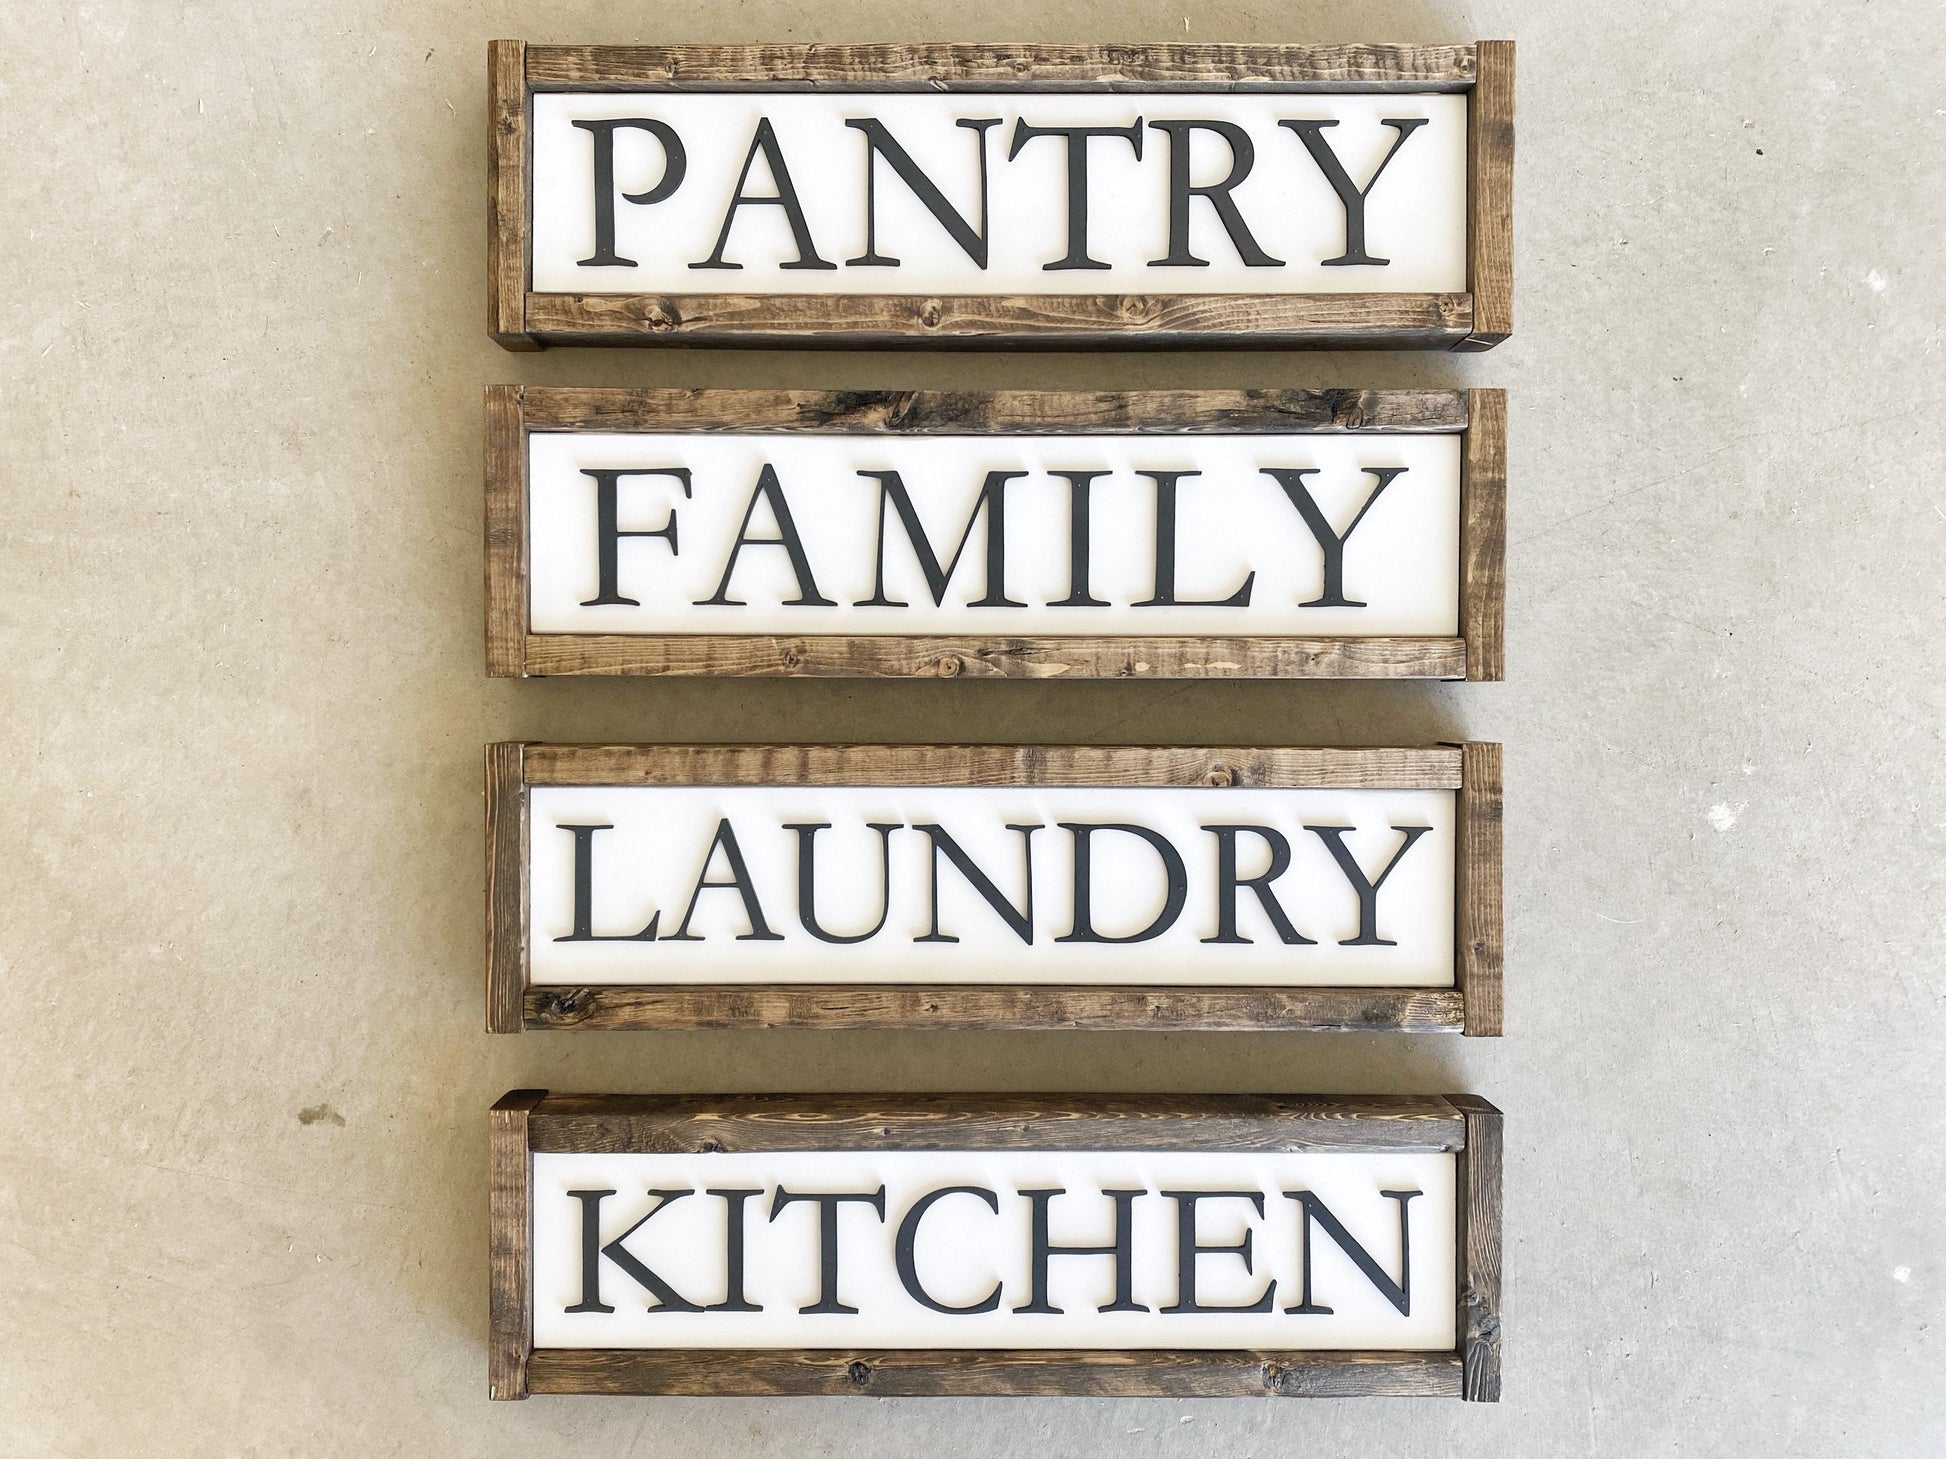 Kitchen Pantry Sign, Rustic Farmhouse Decor, 3D Raised Laser Letter, Simple Lettered Word Sign, Dry Goods Wall Door Accent, Framed Wood Sign